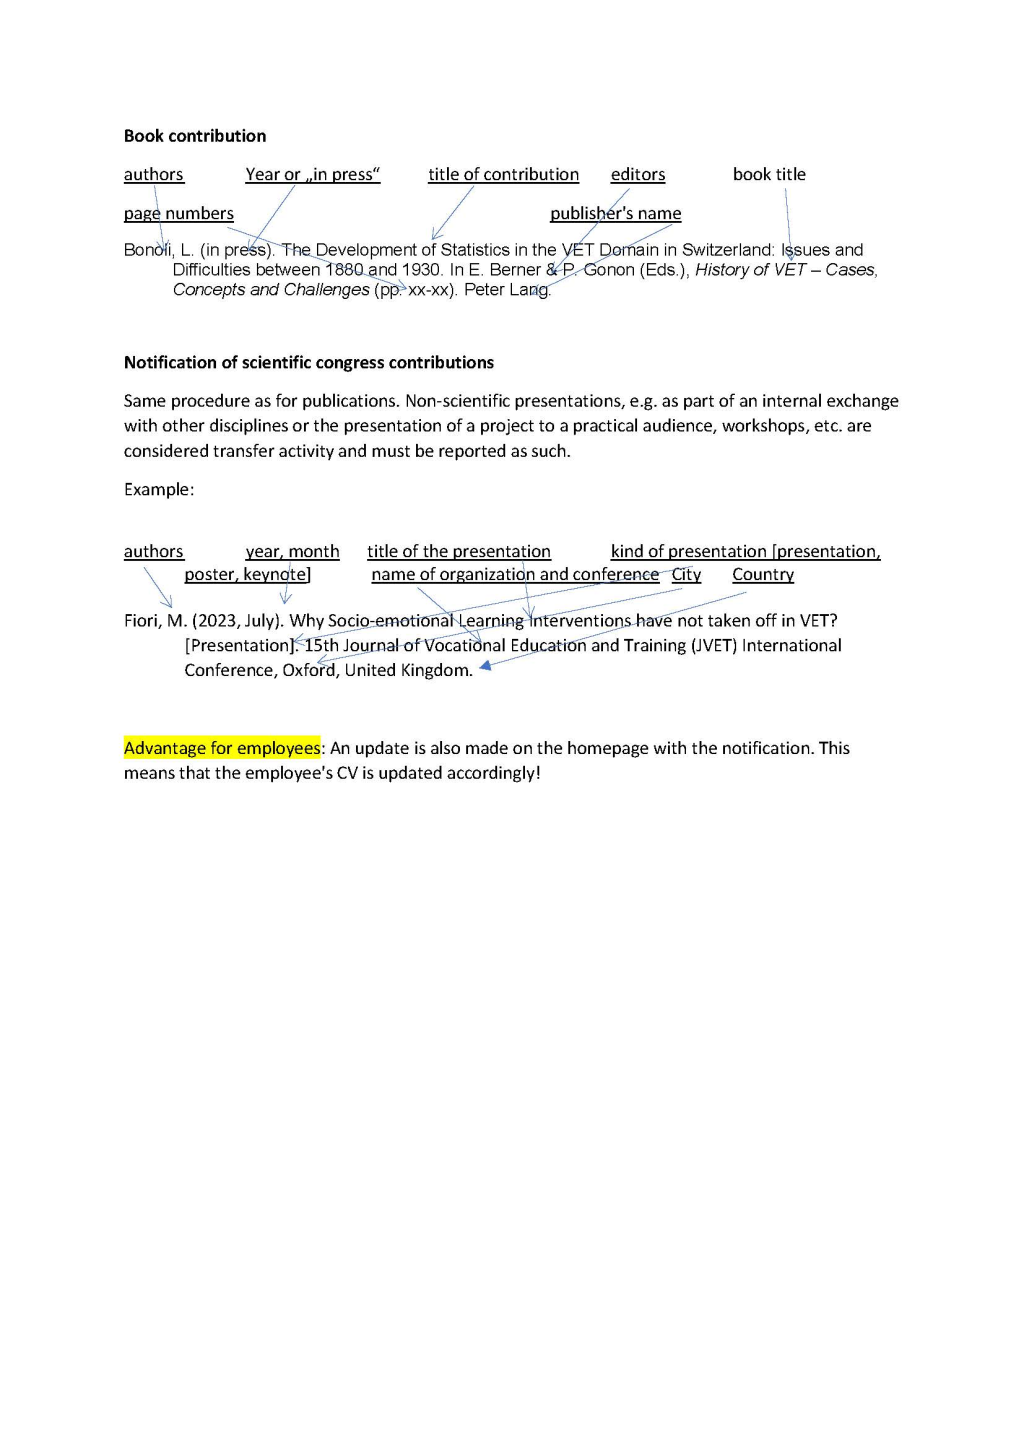 OA_Notification of publications and congresses (page 2)